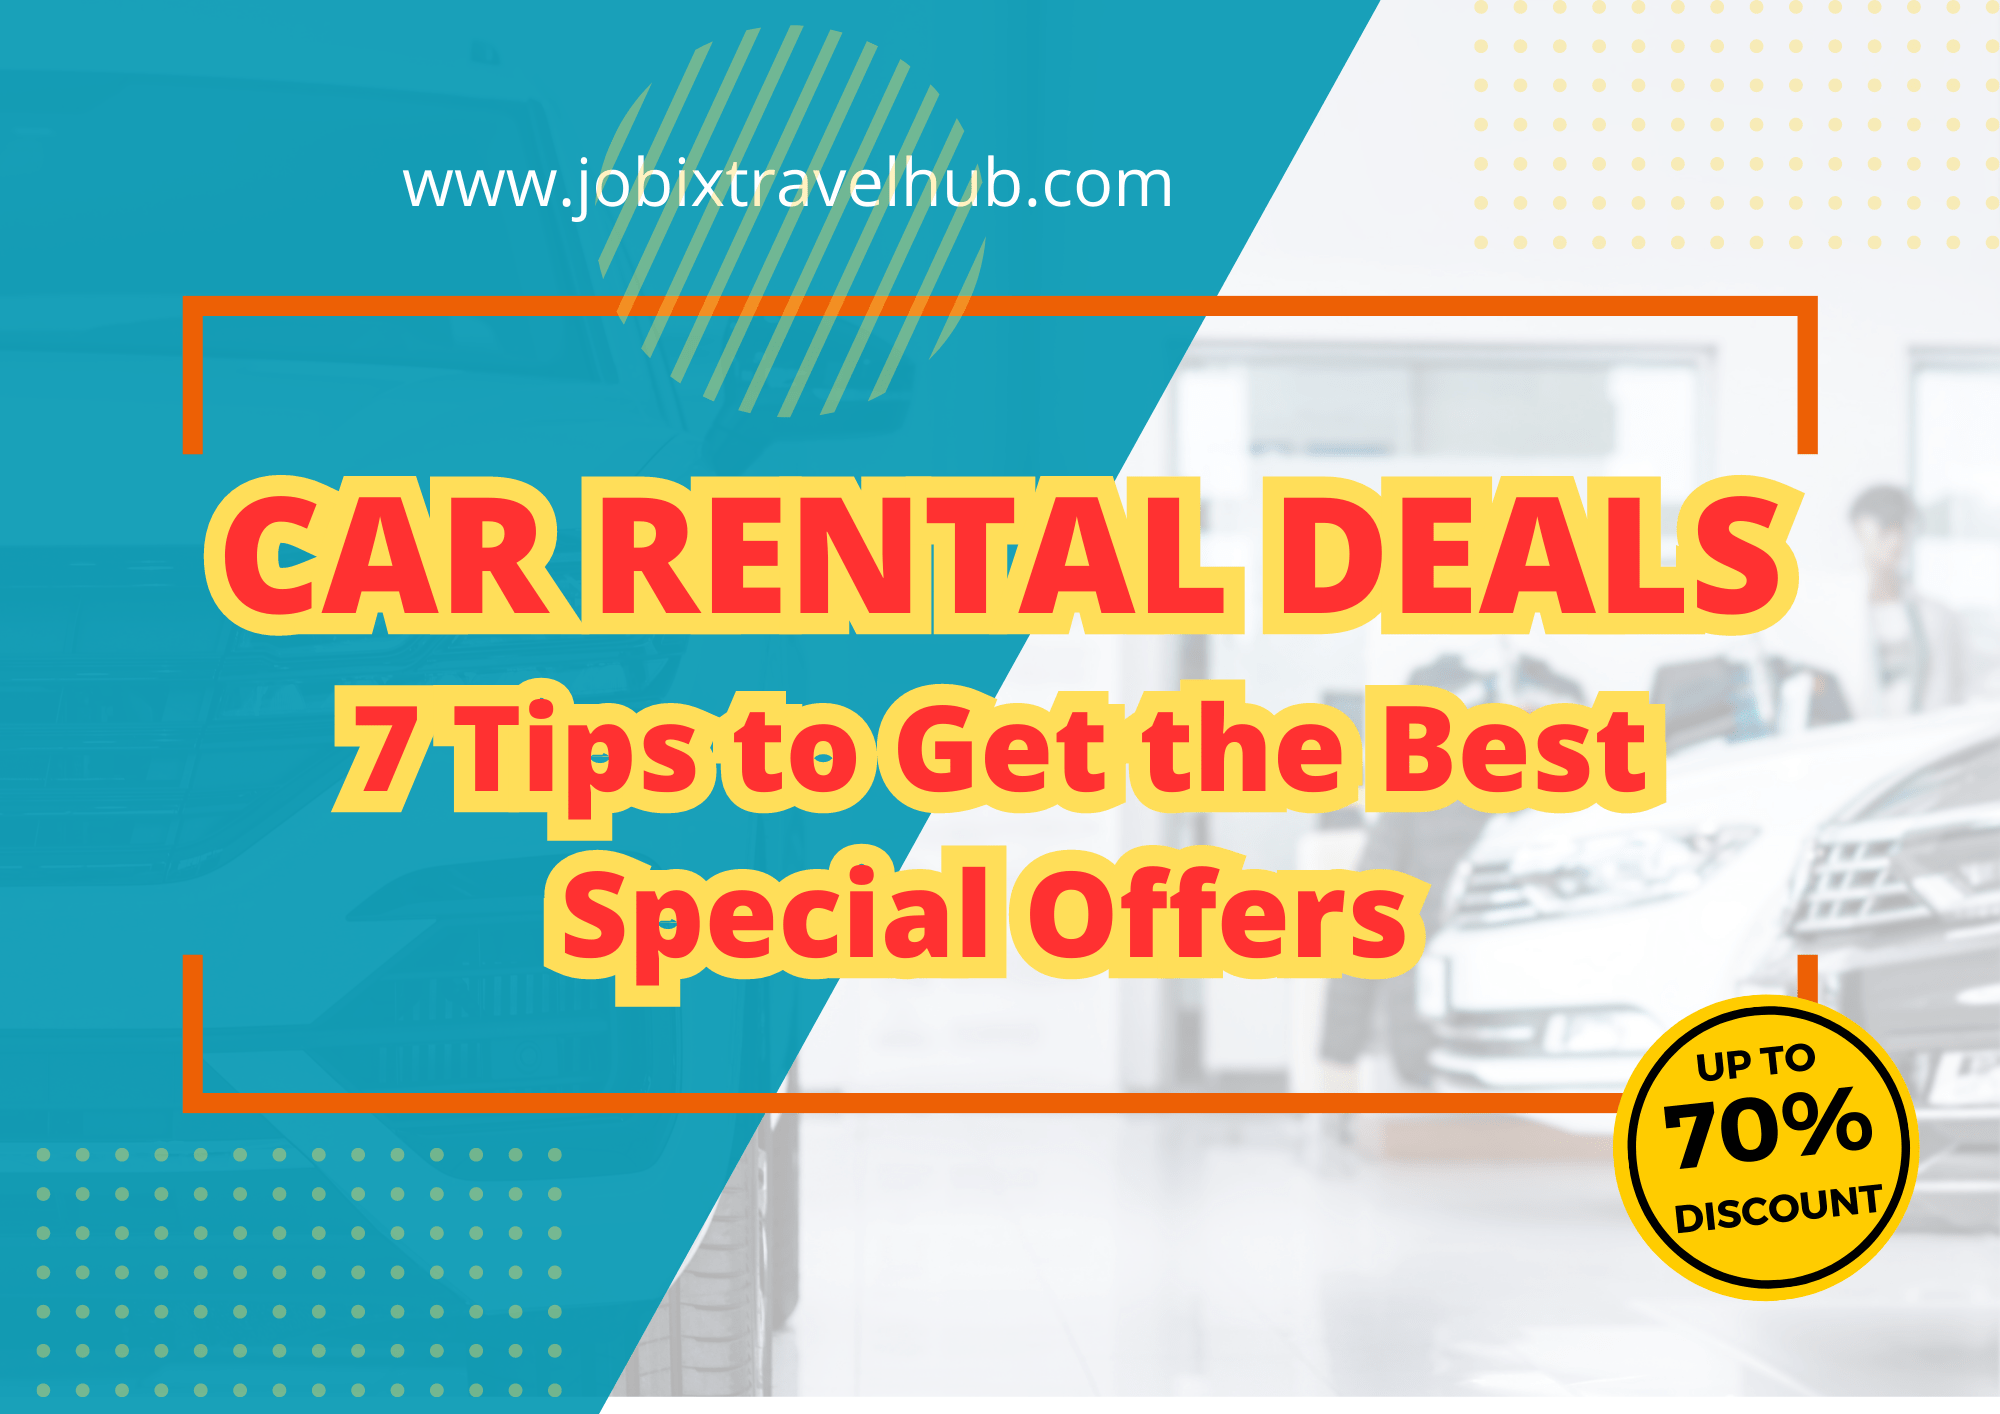 Car Rental Deals: 7 Tips to Get the Best Special Offers